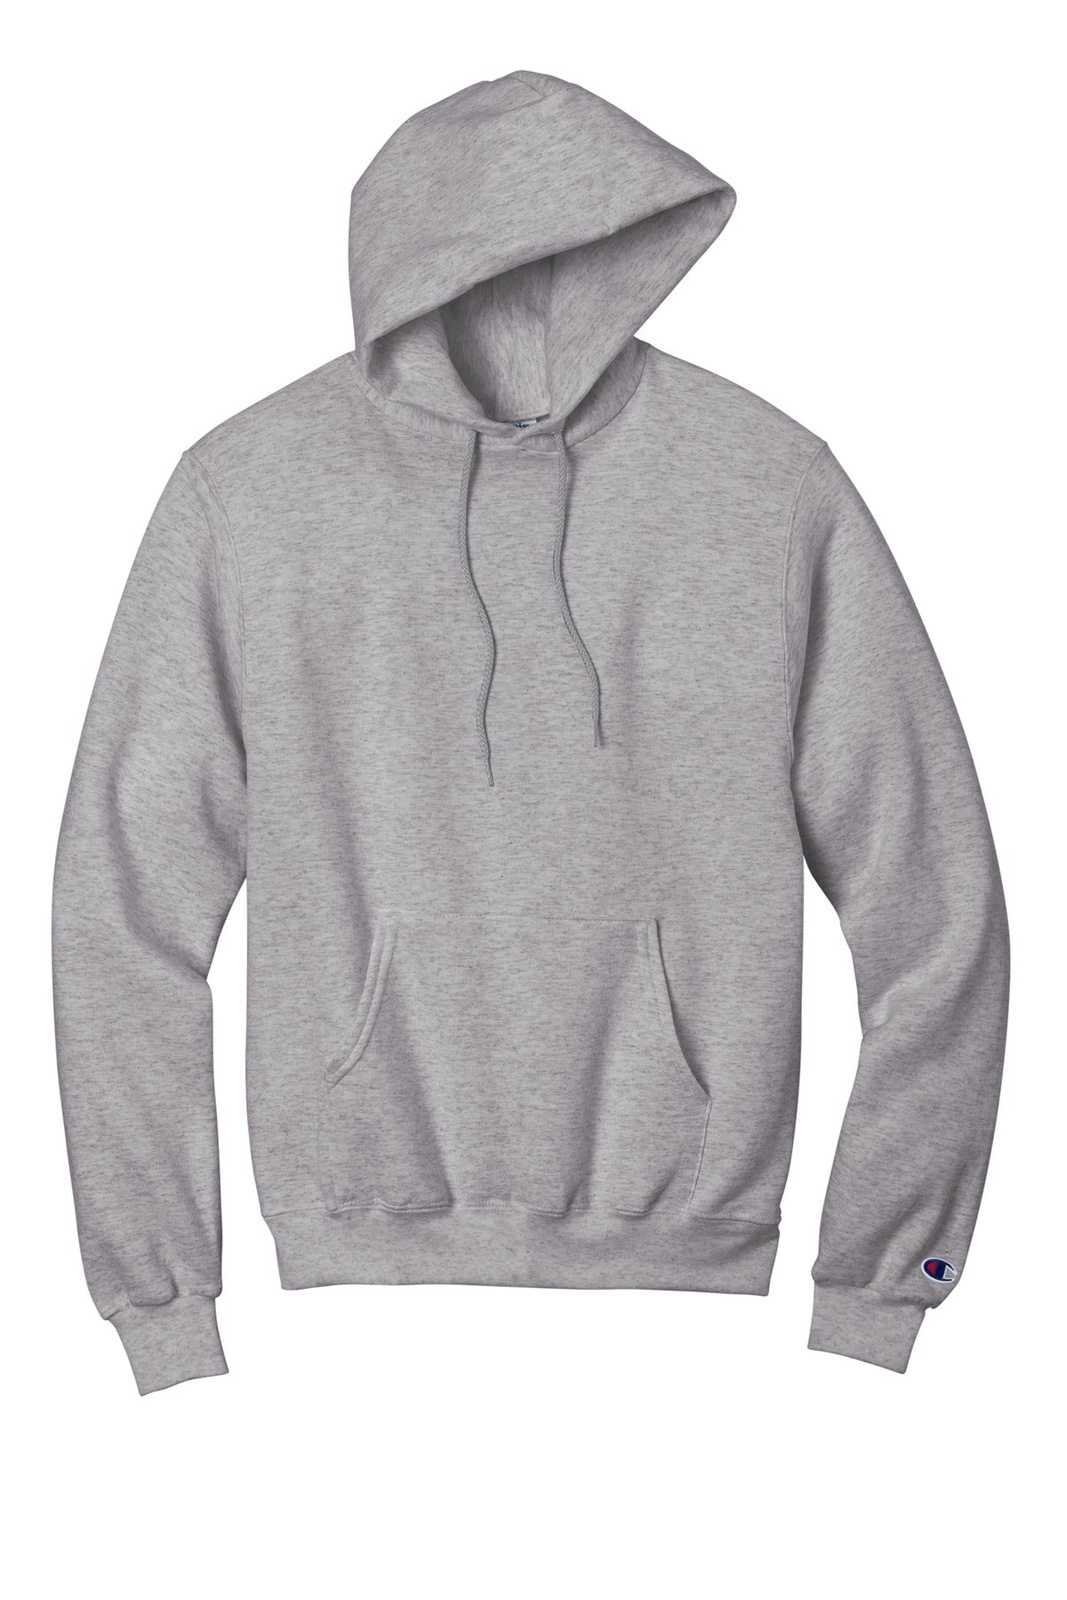 Men's Champion Gray Louisville Bats Baseball Reverse Weave Pullover Hoodie Size: Extra Small